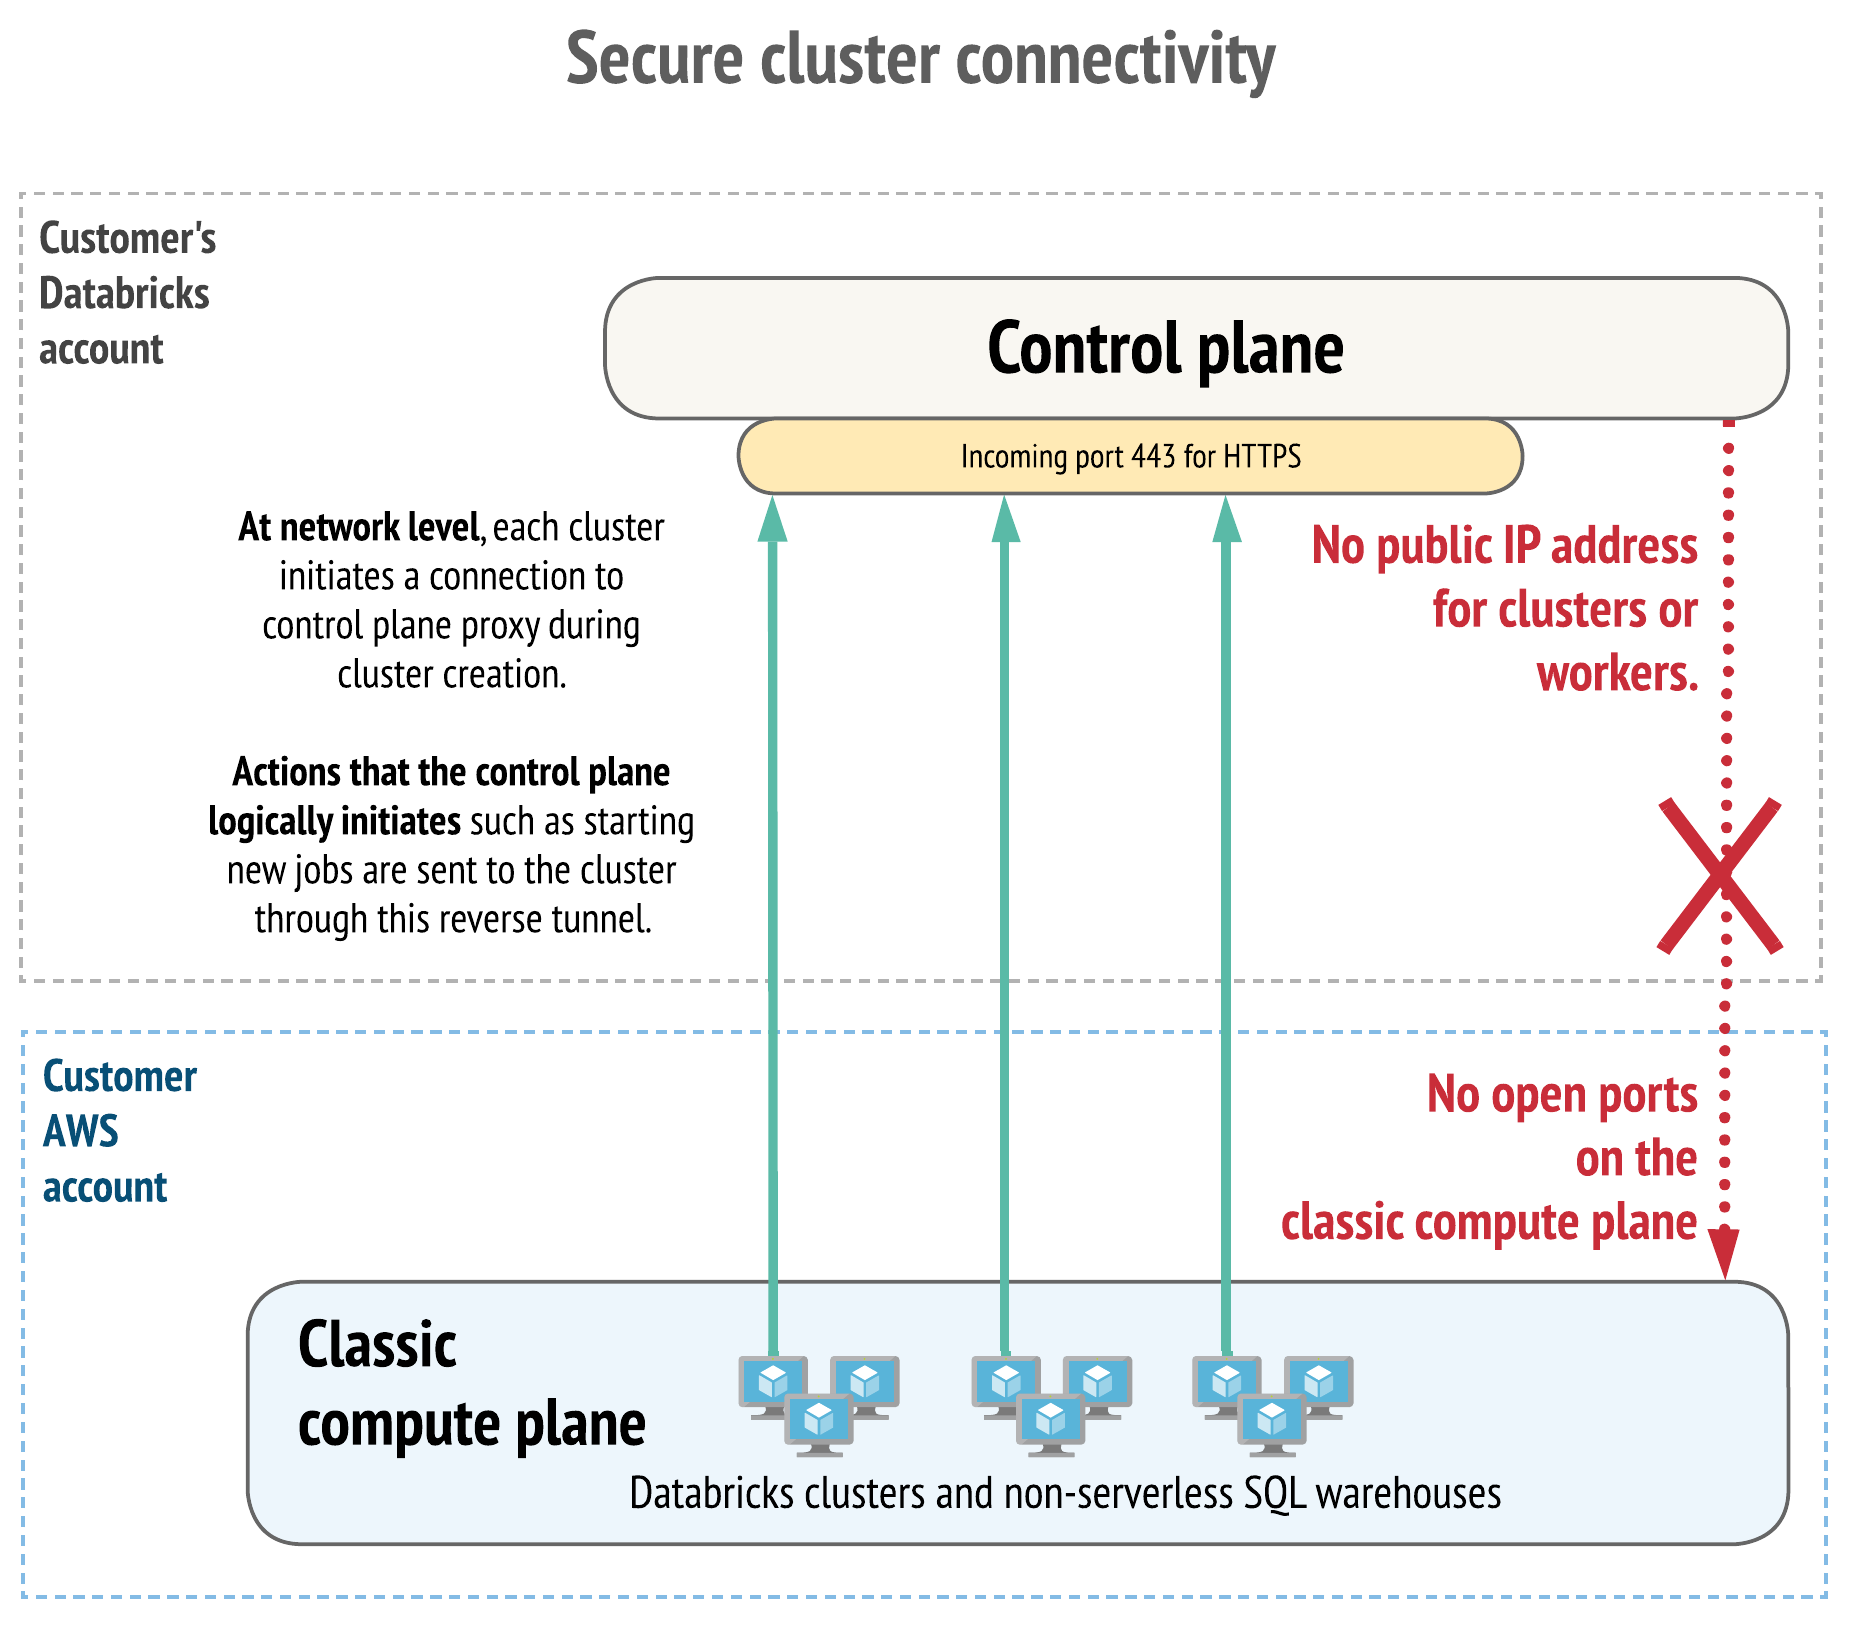 Secure cluster connectivity